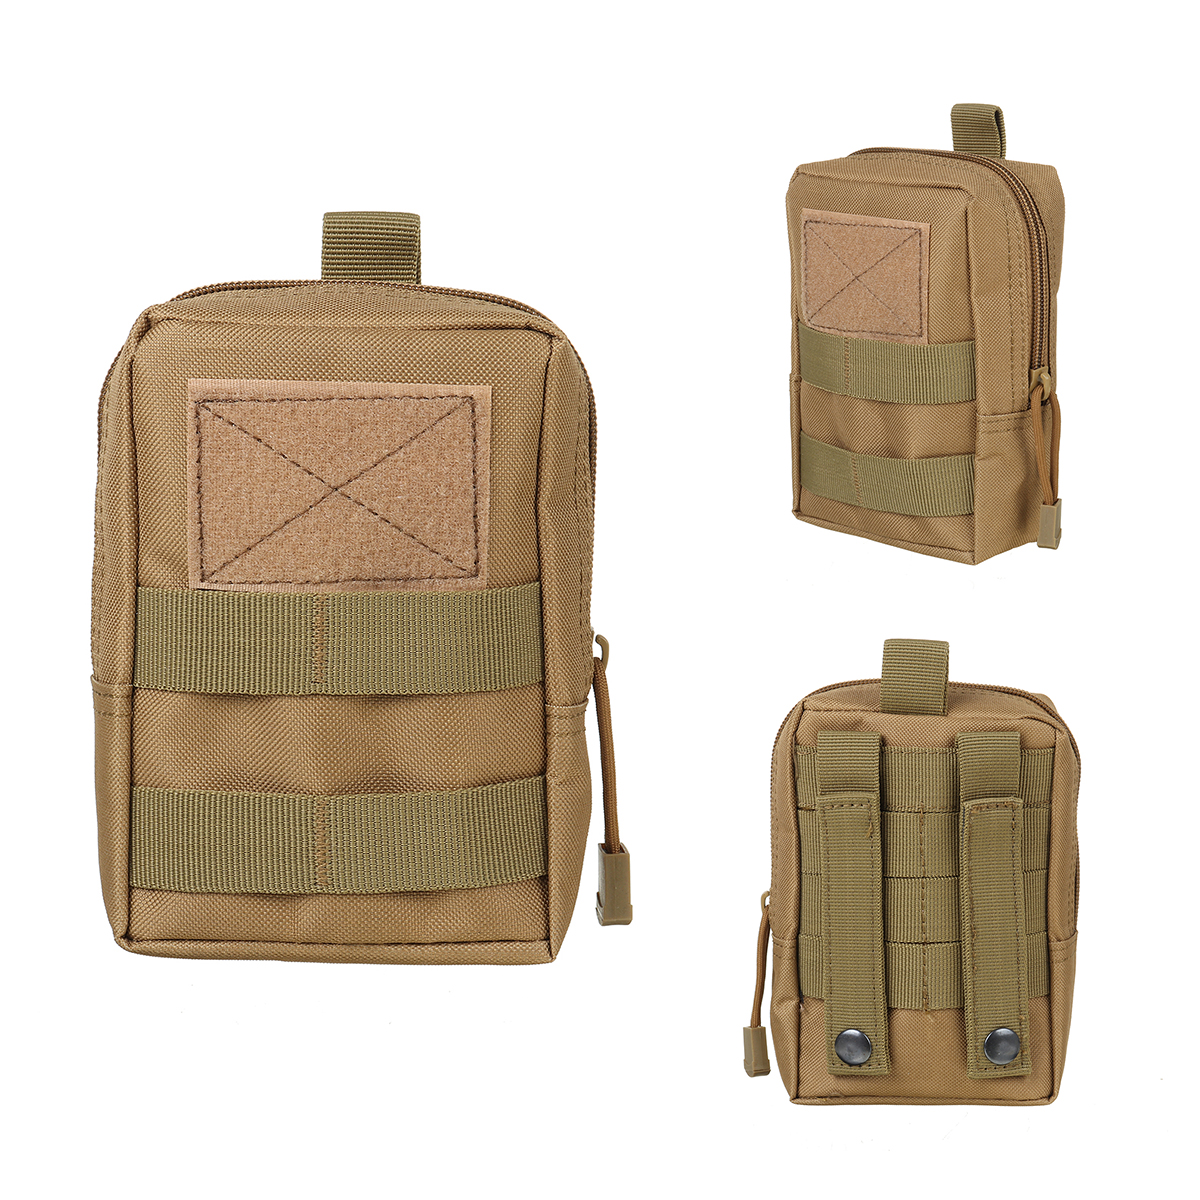 Military-Tactical-Camo-Belt-Pouch-Bag-Pack-Phone-Bags-Molle-Pouch-Camping-Waist-Pocket-Bag-Phone-Cas-1777605-4